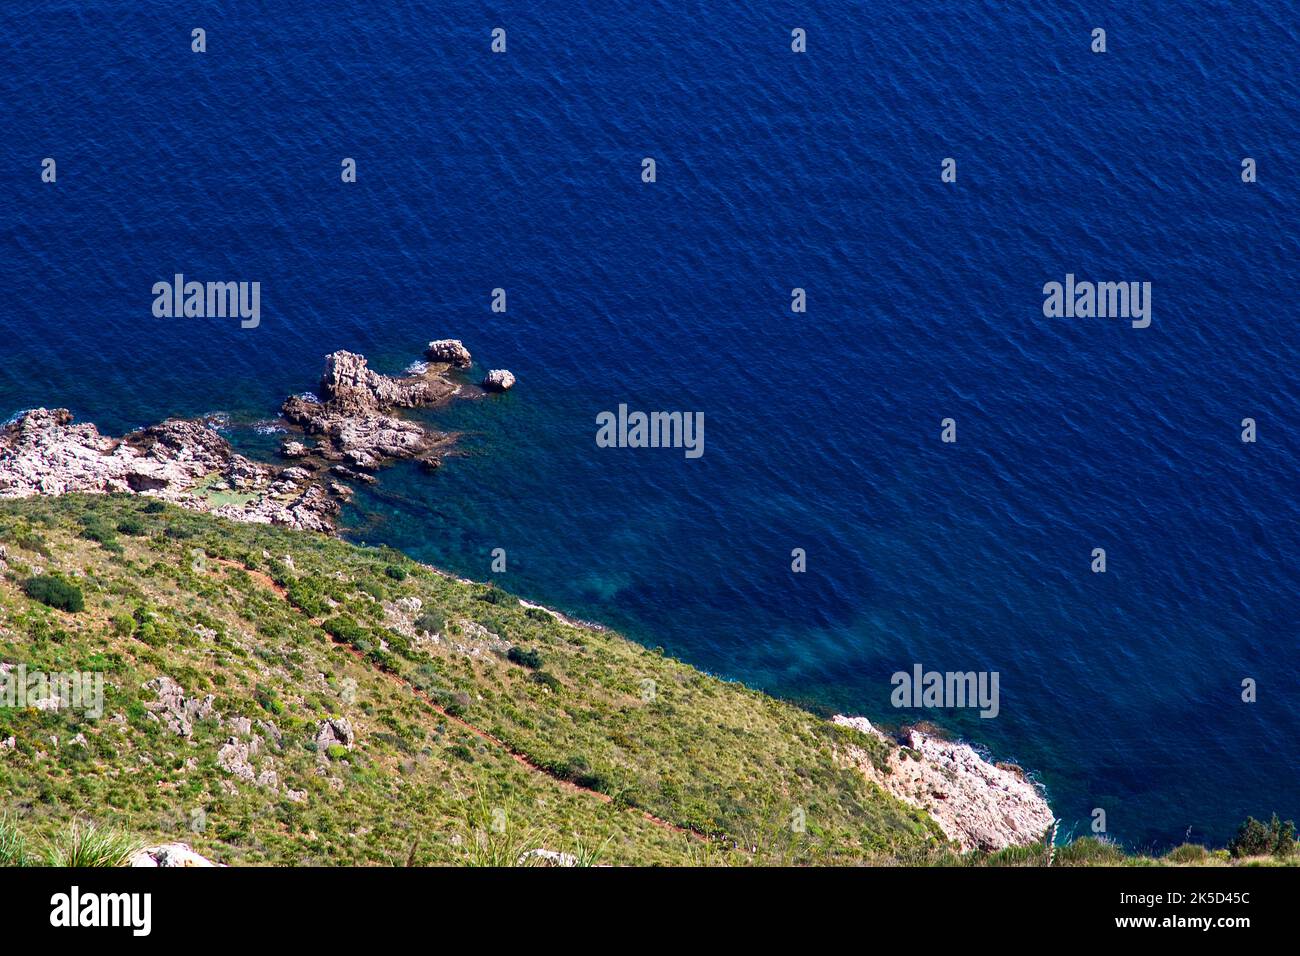 Italy, Sicily, Zingaro National Park, spring, view down to the coast, green-yellow vegetation, rocks in the sea Stock Photo